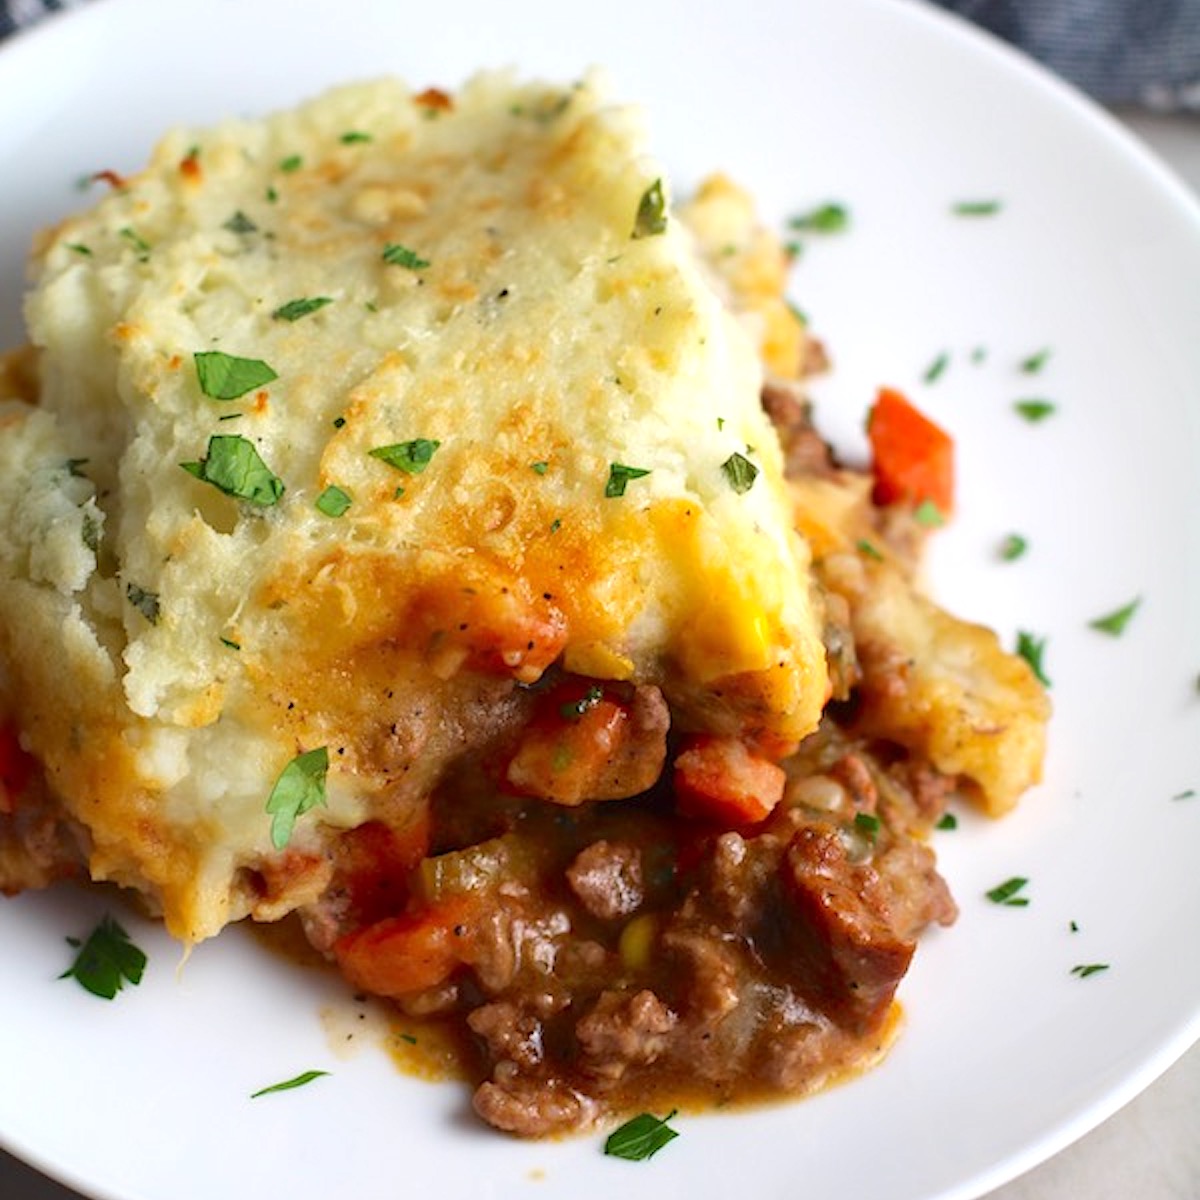 Piece of Sausage Shepherds Pie on plate with dish in back. This recipe has Spanish Chorizo and ground beef cooked in a rich and savory gravy with veggies and herbs.  Creamy mashed potatoes sit on top with manchego, parmesan, and garlic.